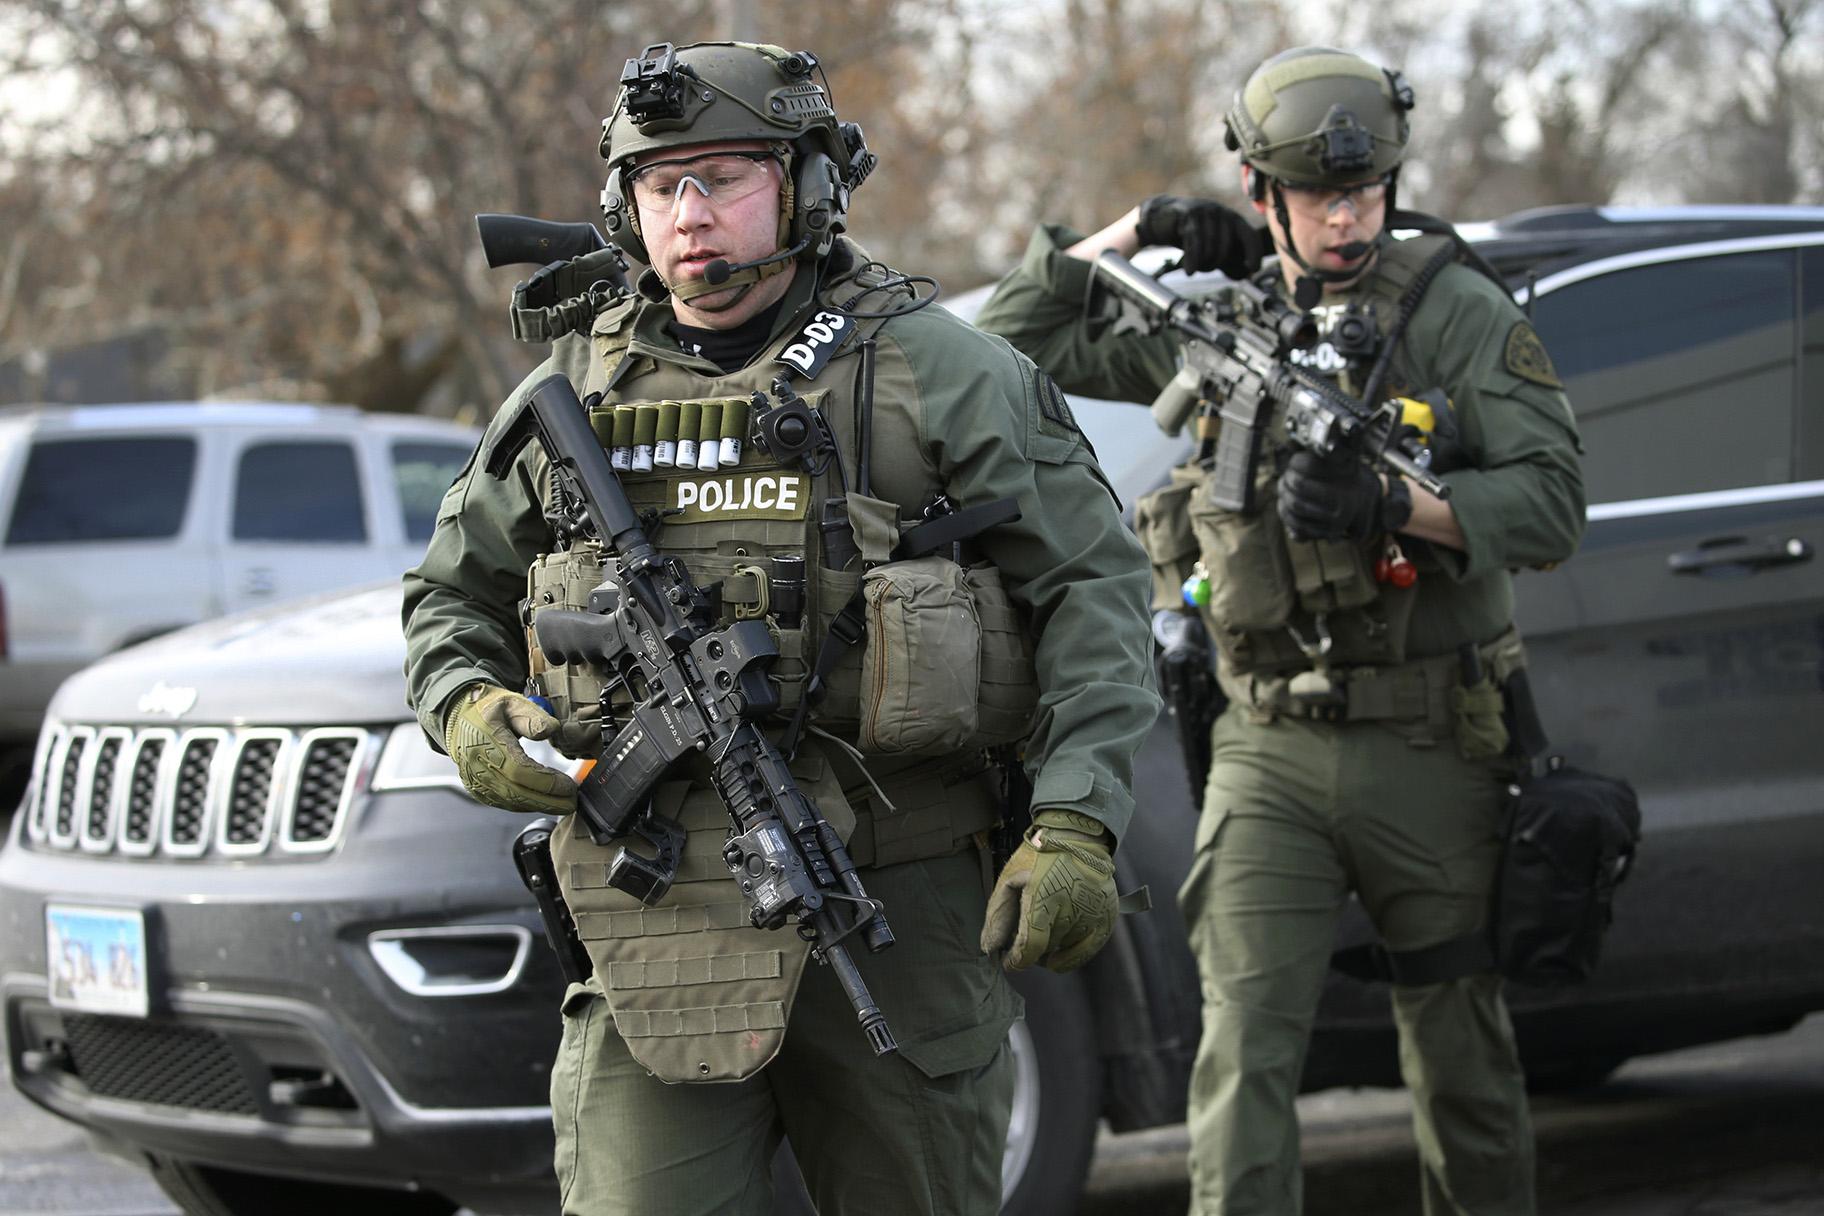 Police officers armed with rifles gather at the scene where an active shooter was reported in Aurora, Illinois, on Friday, Feb. 15, 2019. (Antonio Perez / Chicago Tribune via AP)